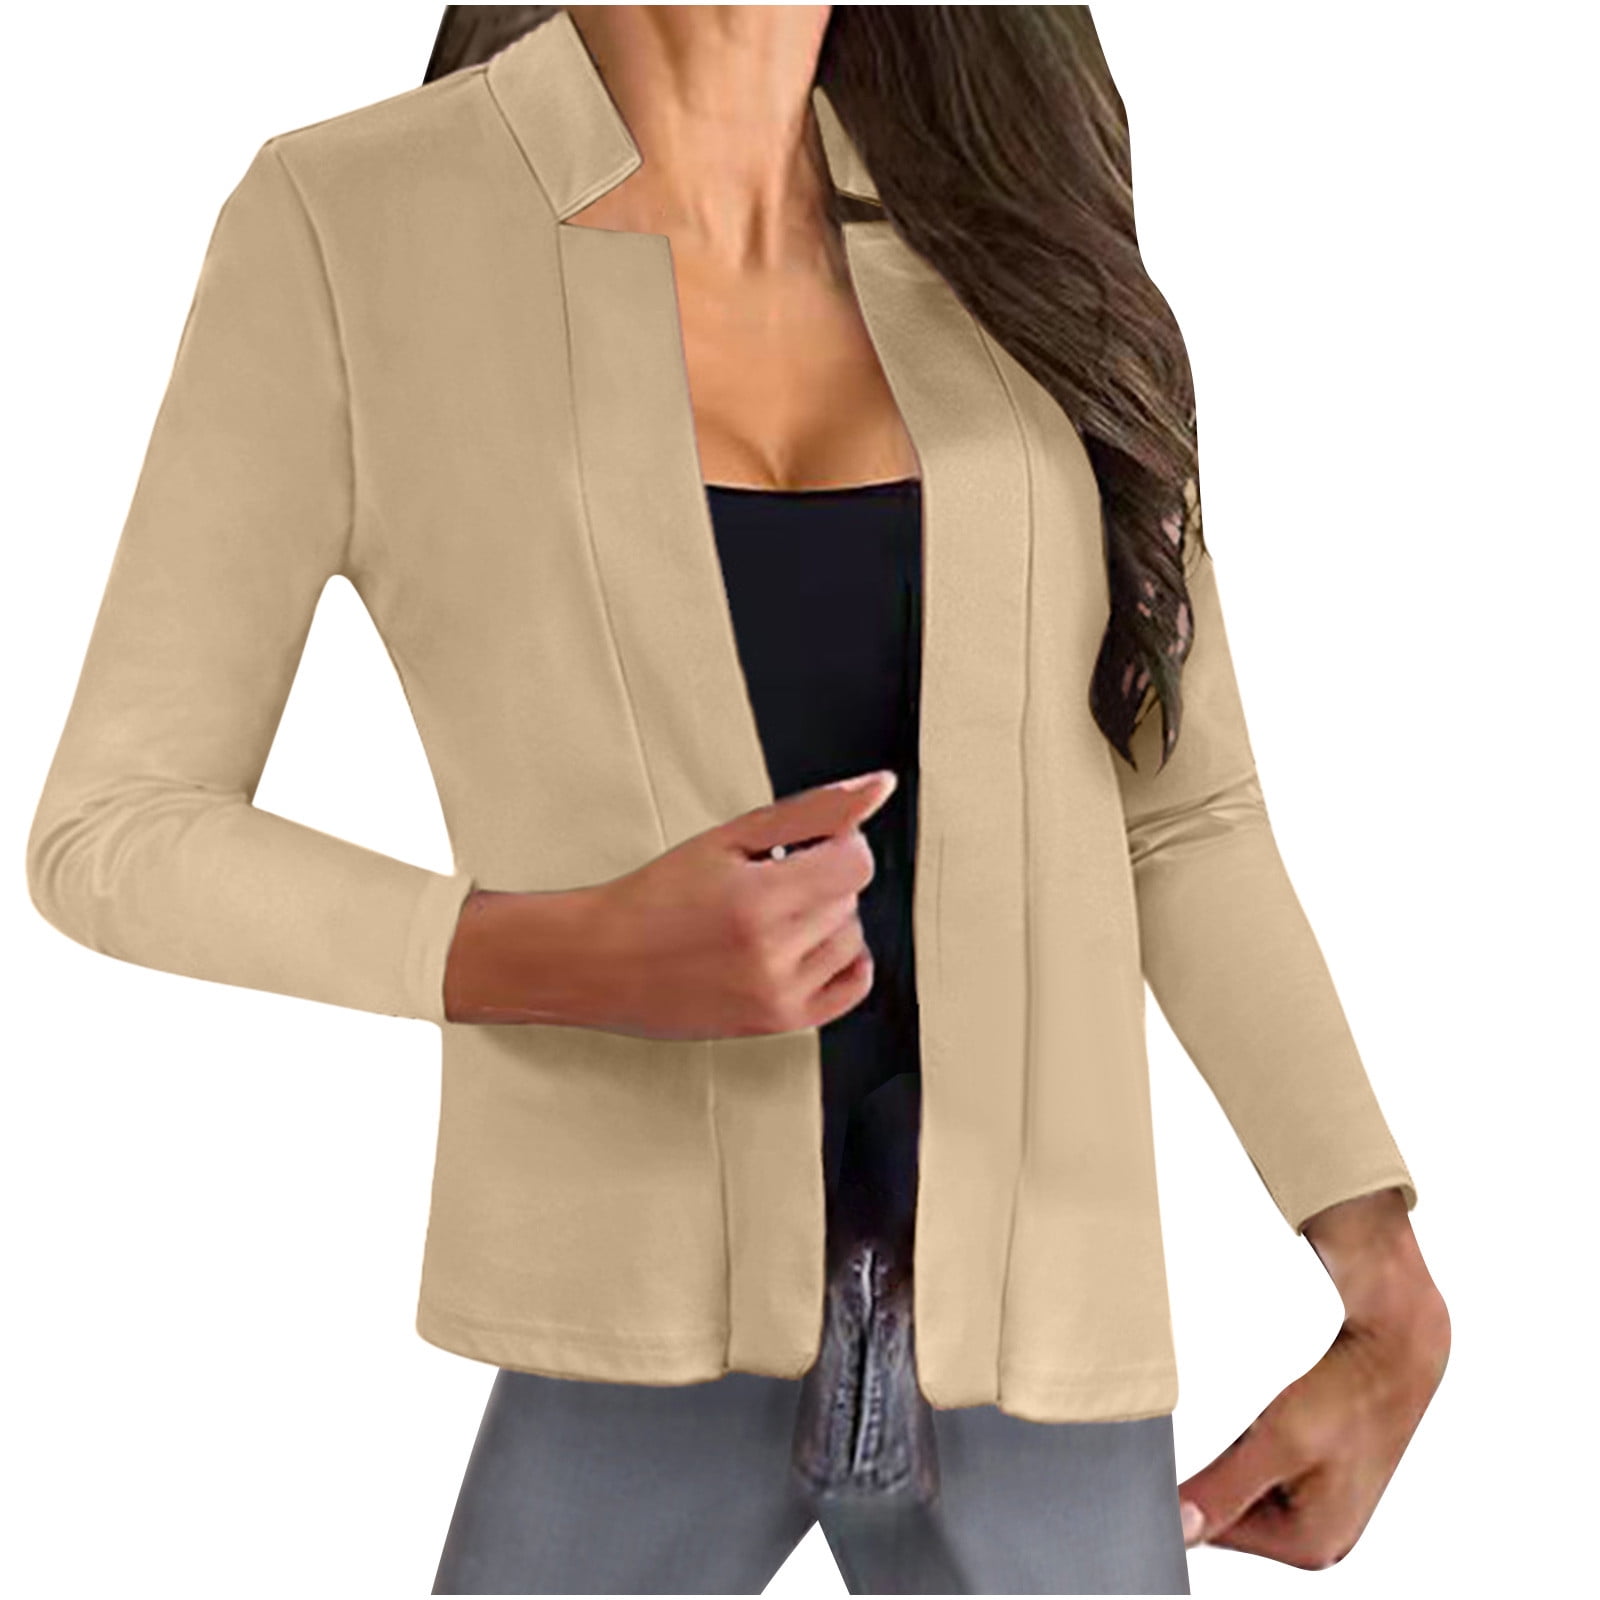 Clearance Under $10 ! BVnarty Women's Jacket Coat Shacket Jacket Casual  Stand Collar Lightweight Leisure Office Suit Outerwear Winter Fashion Top  Plus